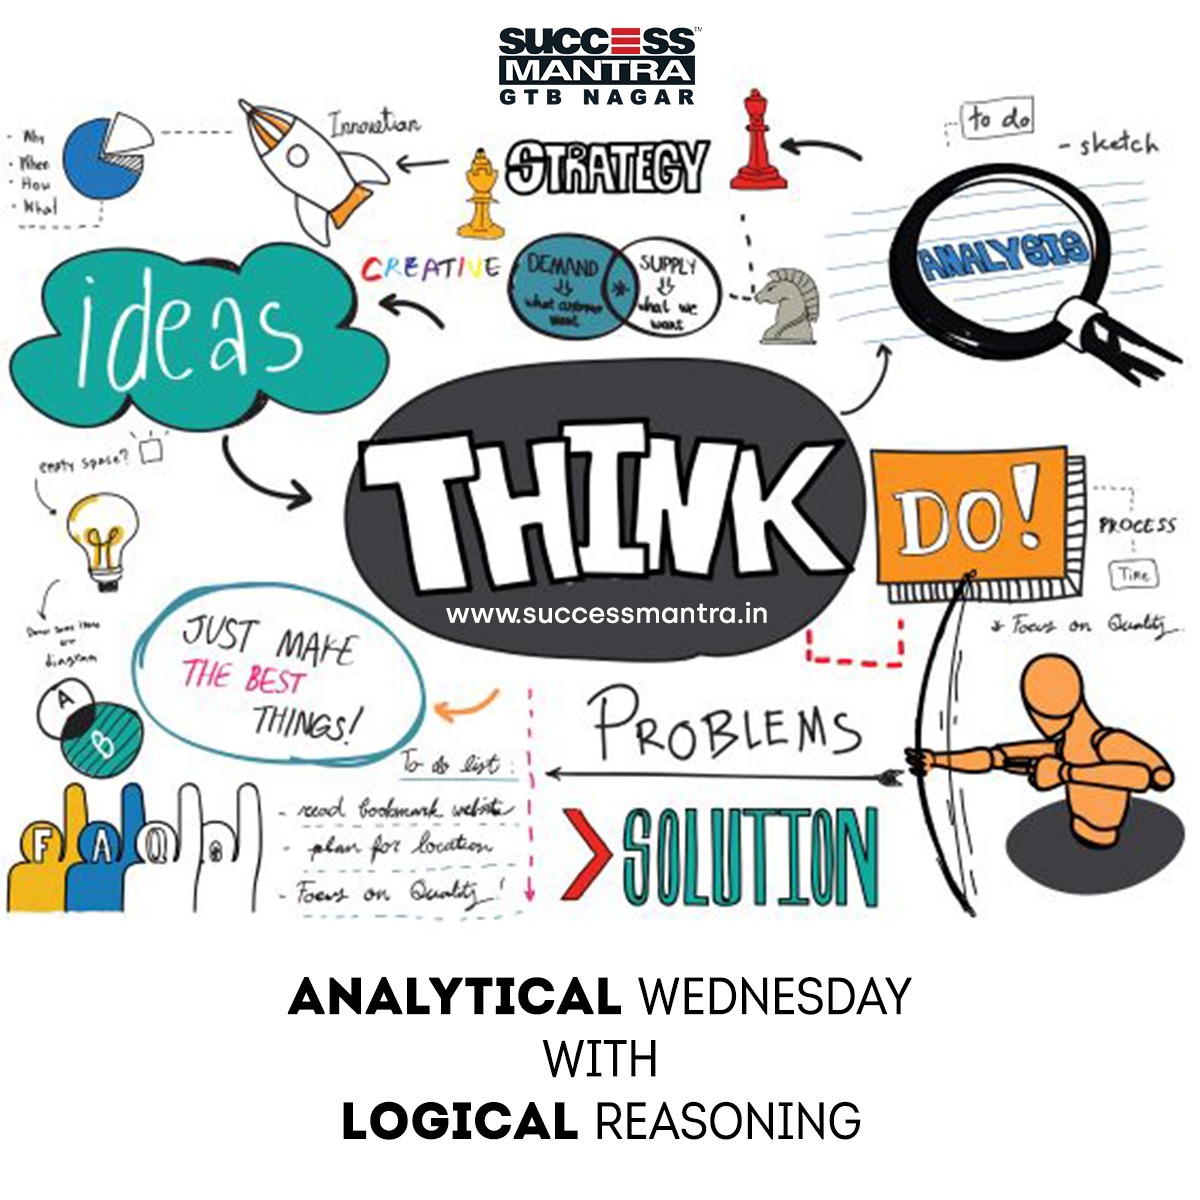 Questions on Logical Reasoning SMLRQ040